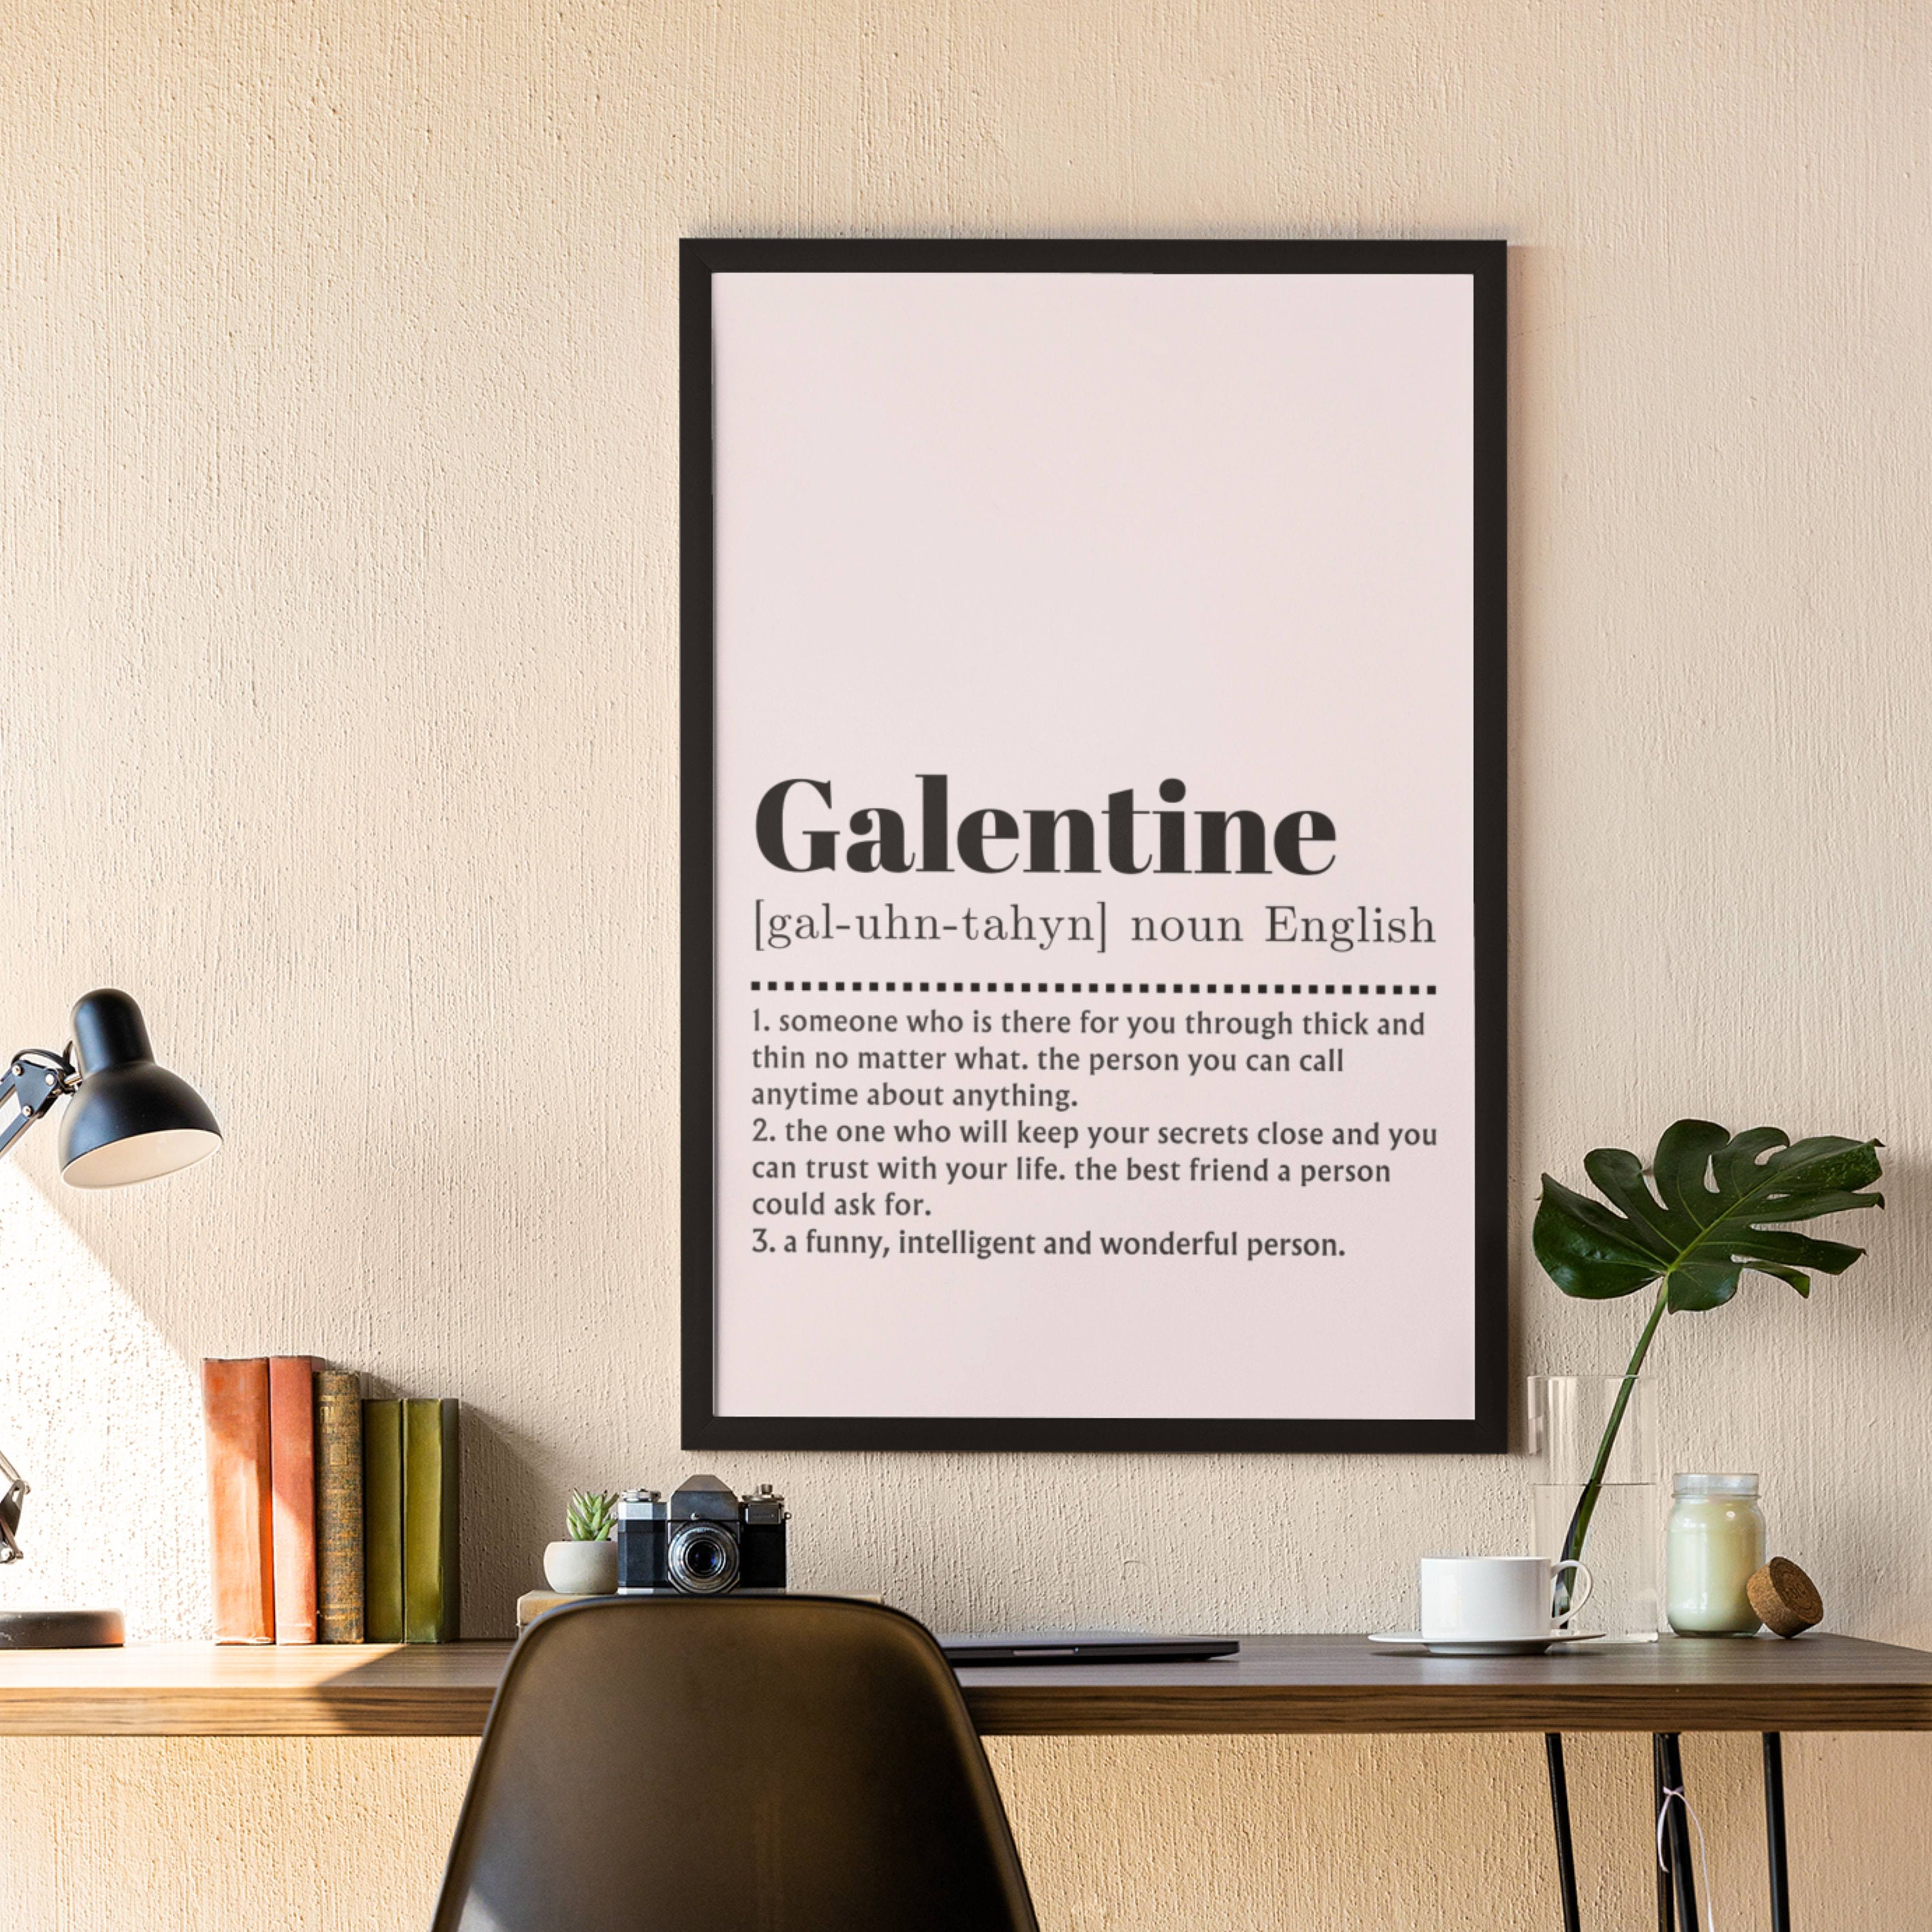 Galentine Definition Print Women S Day T For Friends Galentines Day Party Decor Digital